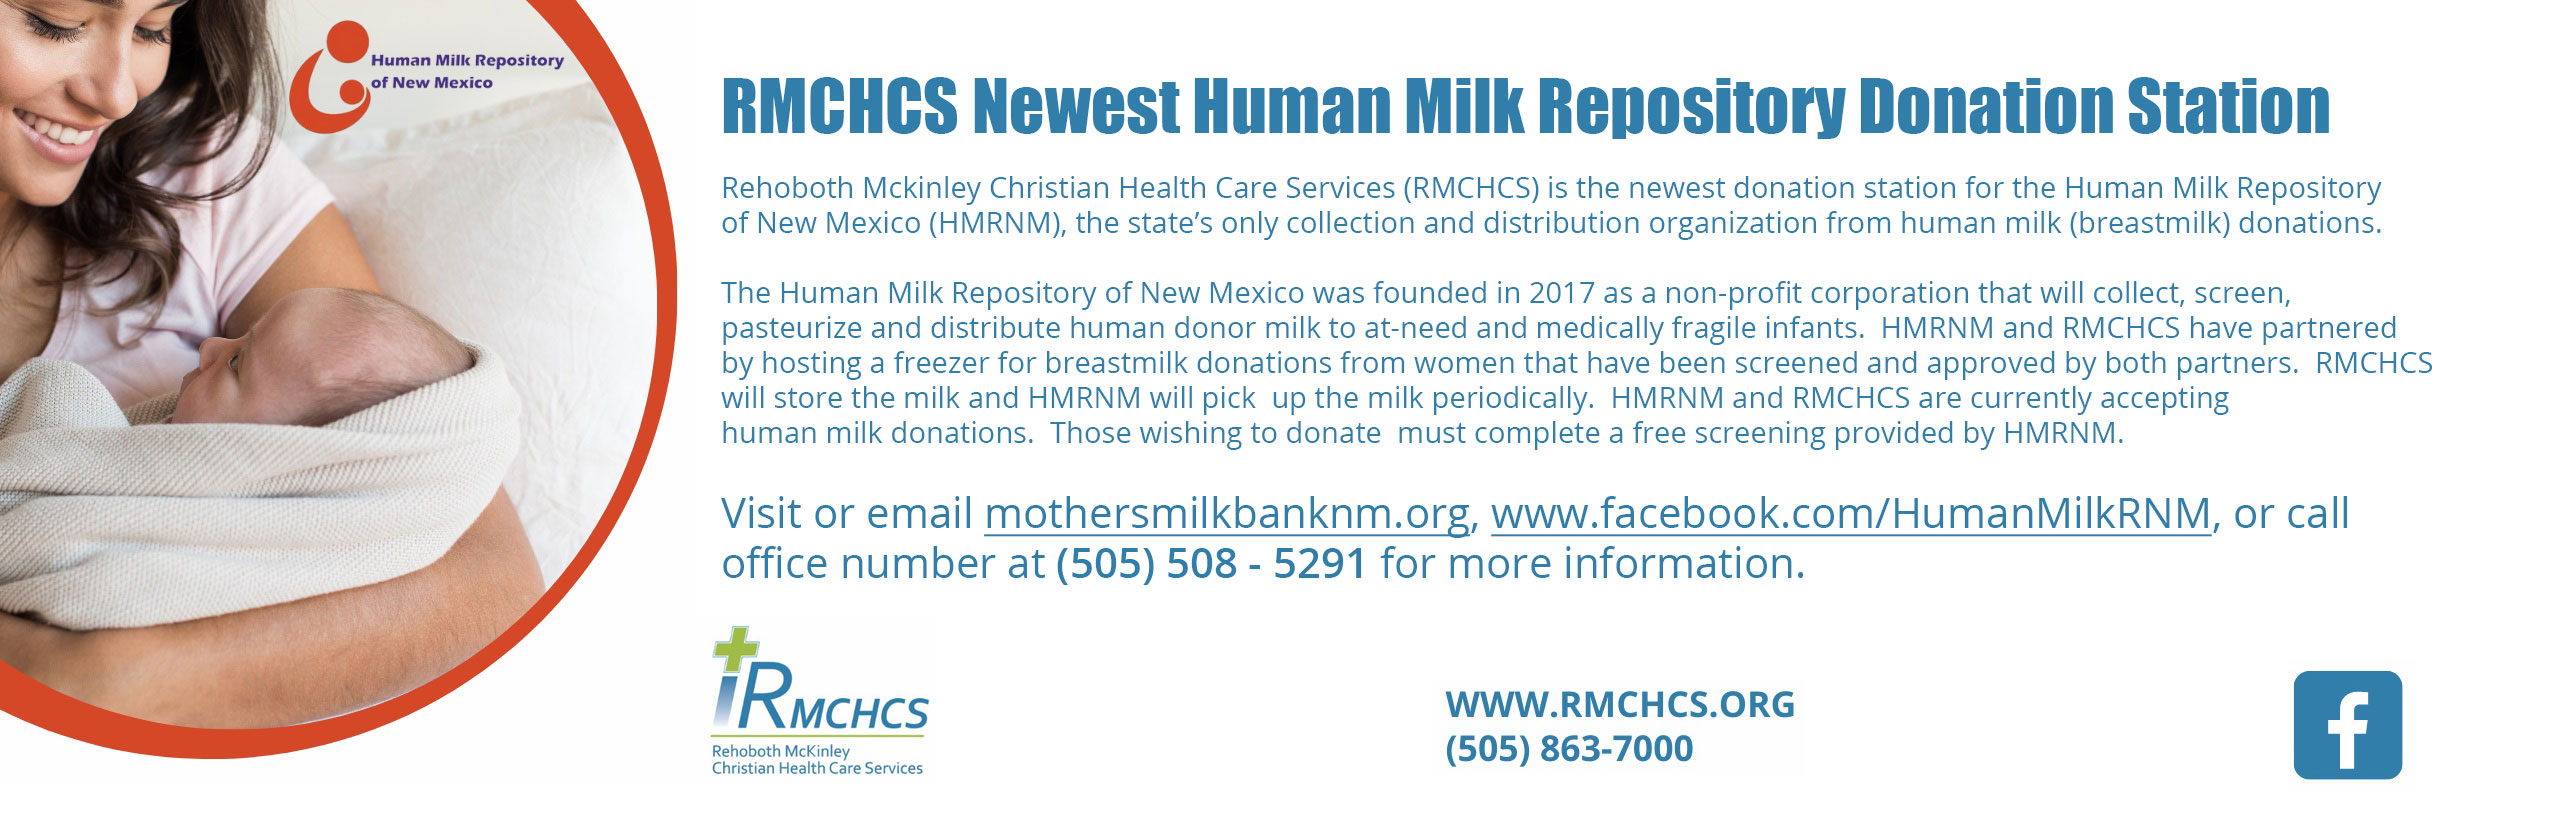 Banner picture of a young mother swaddling her newborn and smiling at him/her. Banner says:

Human Milk Repository of New Mexico

RMCHCS Newest Human Milk Repository Donation Station

Rehoboth Mckinley Christian Health Care Services (RMCHCS) is the newest donation station for the Human Milk Repository of New Mexico (HMRNM), the state's only collection and distribution organization from human milk (breastmilk) donations.

The Human Milk Repository of New Mexico was founded in 2017 as a non-profit corporation that will collect, screen, pasteurize and distribute human donor milk to at-need and medically fragile infants. HMRNM and RMCHCS have partnered by hosting a freezer for breastmilk donations from women that have been screened and approved by both partners.RMCHC will store the milk and HMRNM will pick up the milk periodically. HMRNM and RMCHCS are currently accepting human milk donations. Those wishing to donate must complete a free screening provided by HMRNM. 

Visit or e-mail mothersmilkbanknm.org, www.facebook.com/HumanMilkRNM, or call office number at (505) 508-5291 for more information.

RMCHCS
Rehoboth McKinley Chrisitan Health Care Services


www.rmchcs.org
(505) 863-7000

-facebook logo (f)